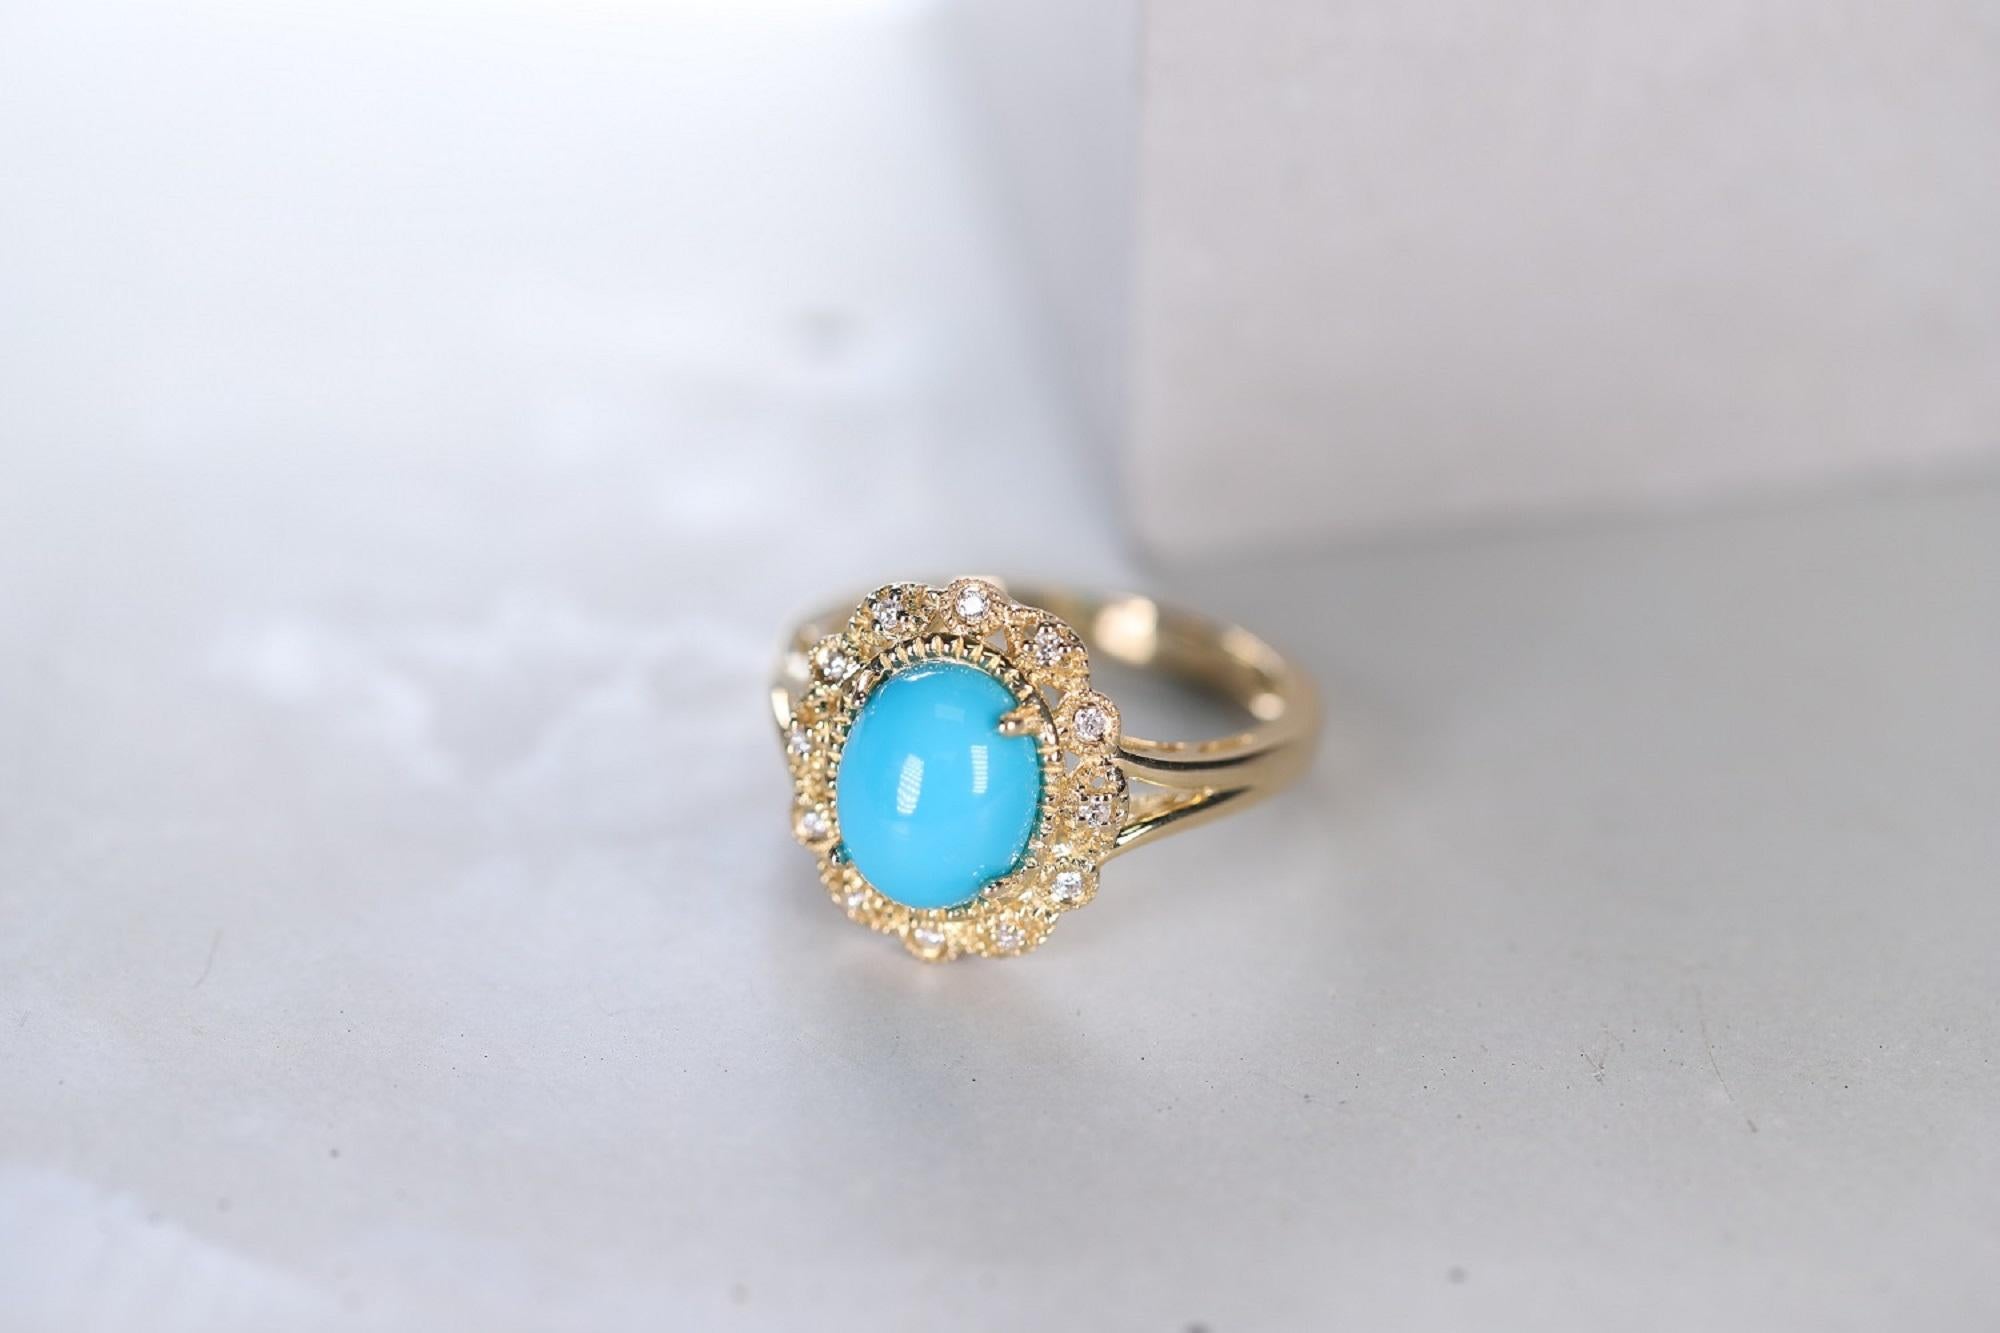 Stunning, timeless and classy eternity Unique Ring. Decorate yourself in luxury with this Gin & Grace Ring. The 14k Yellow Gold jewelry boasts Oval-Cab Prong Setting Turquoise (1 pcs) 2.39 Carat, along with Round-cut White Diamond (12 Pcs) 0.09